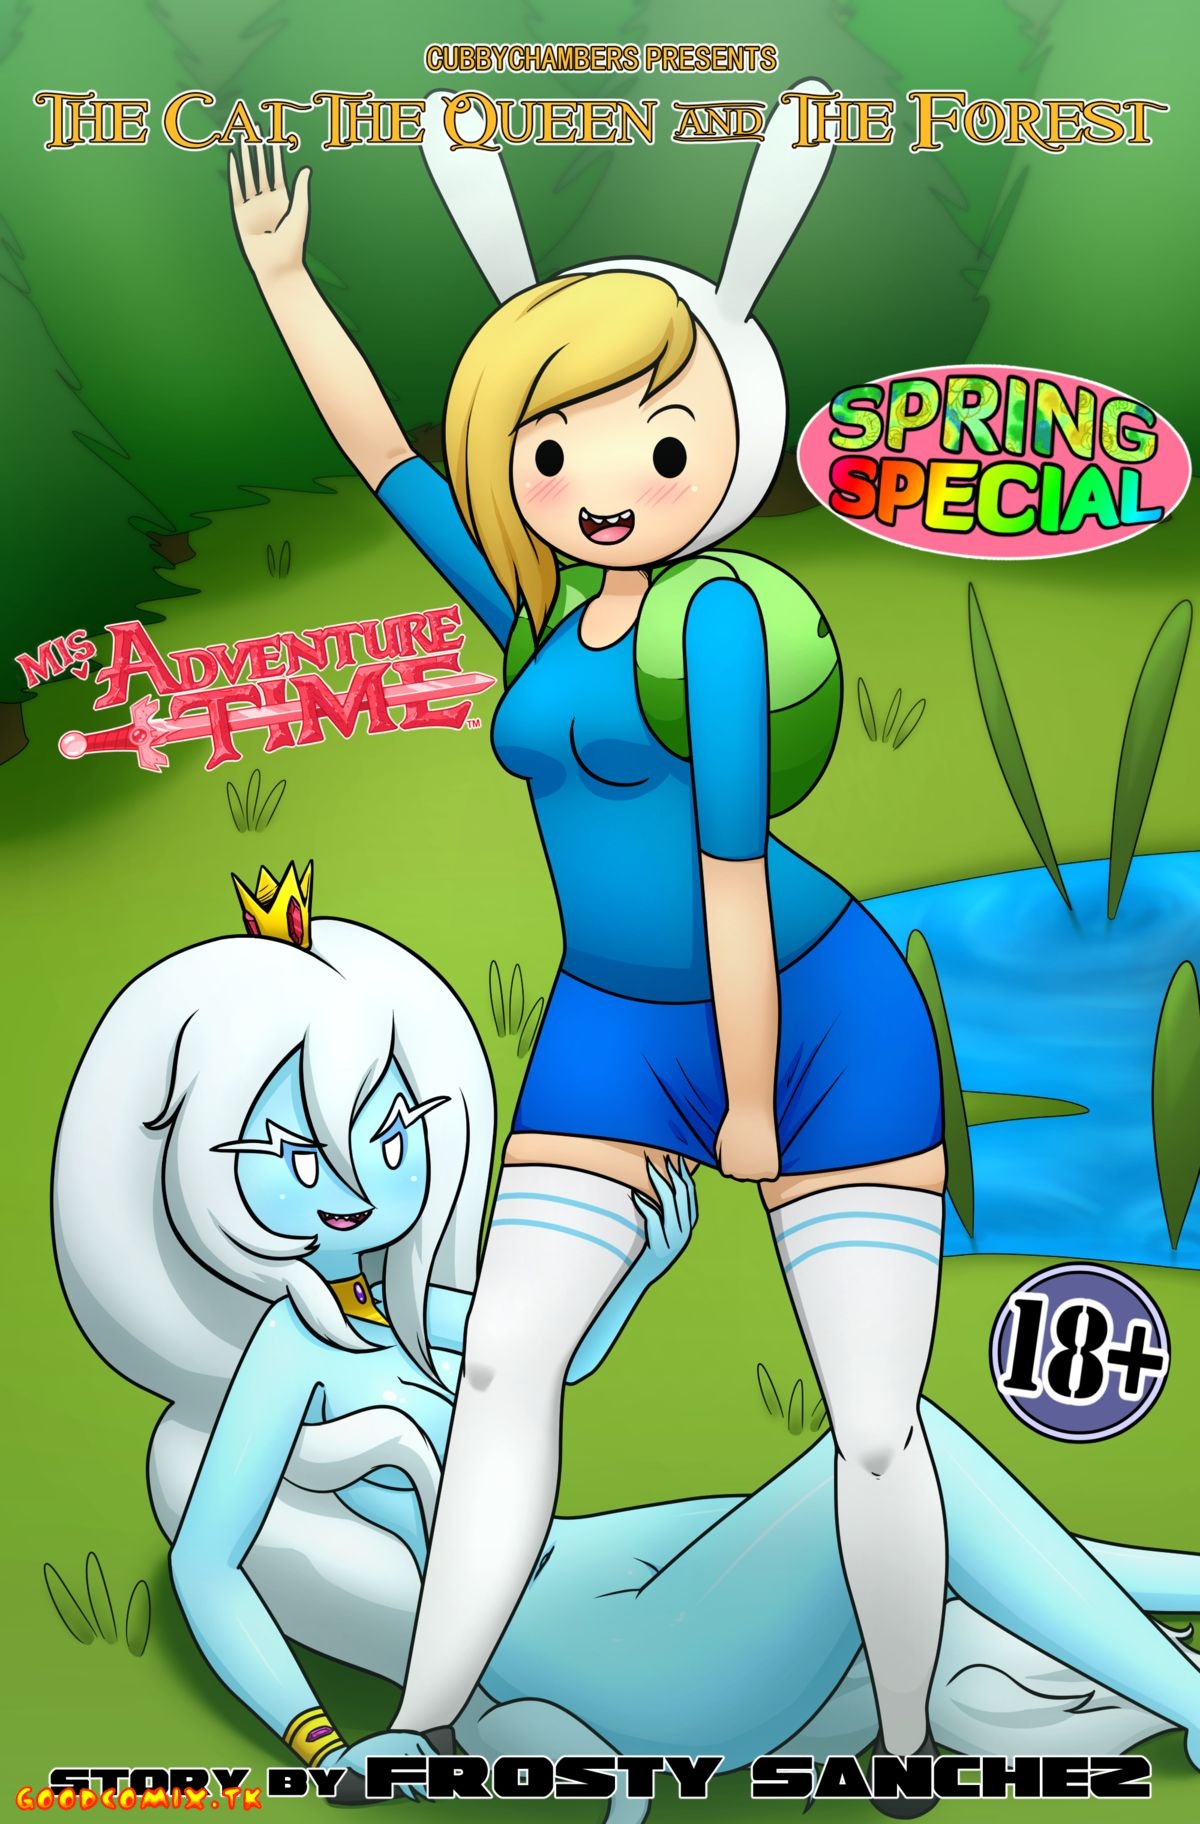 SureFap xxx porno Adventure Time - MisAdventure Time - Spring Special - The Cat, the Queen, and the Forest